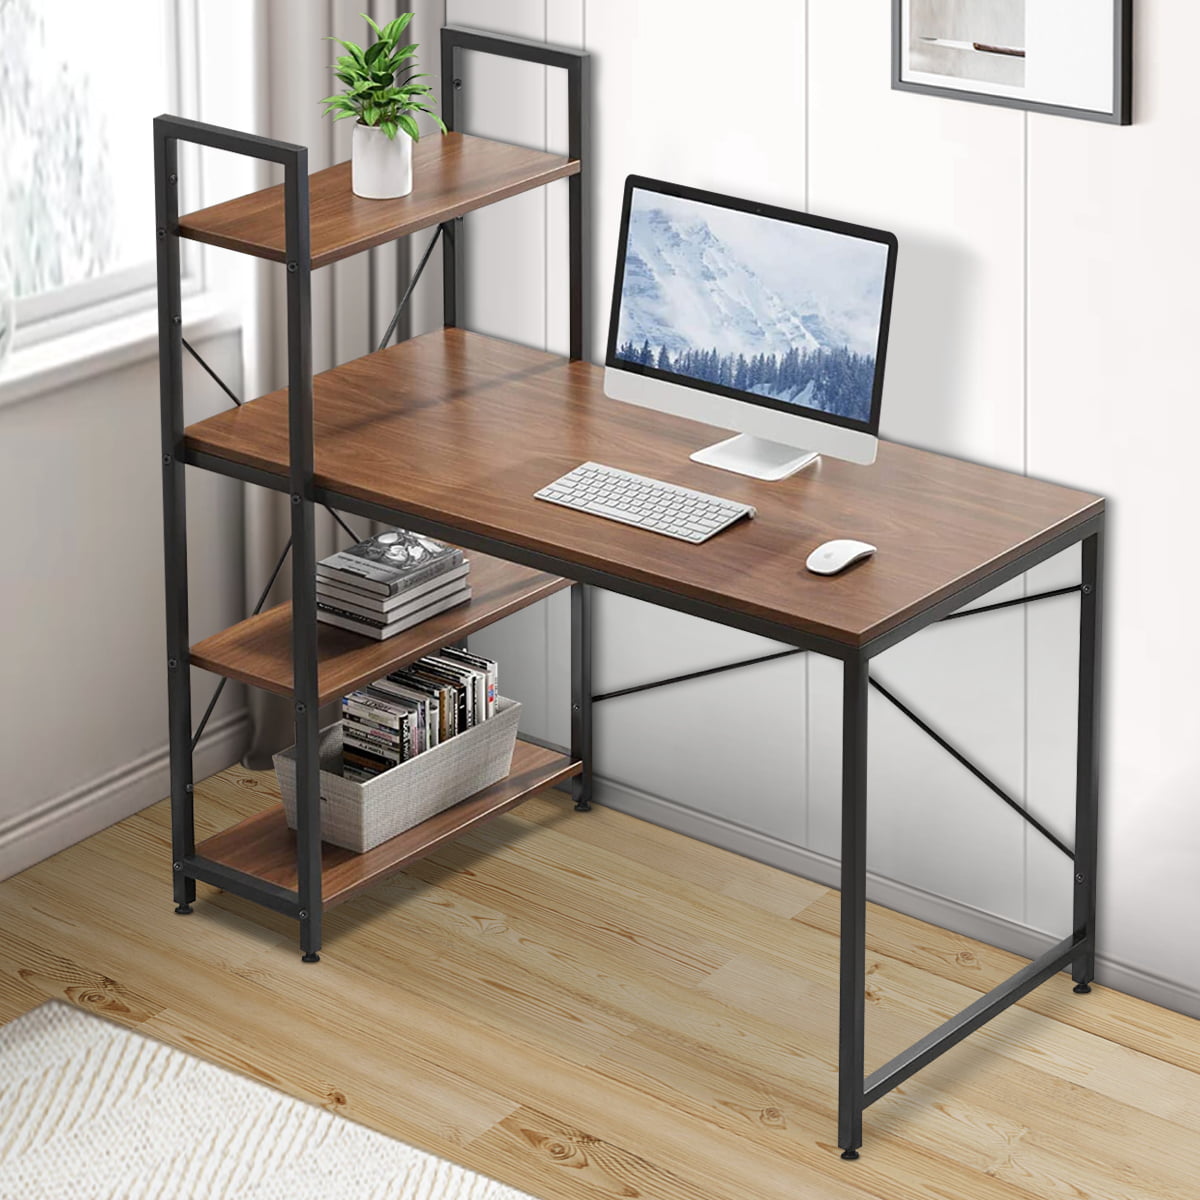 Multifunction Wooden Computer Desk W/ Shelves Home Office PC Laptop Study Table 